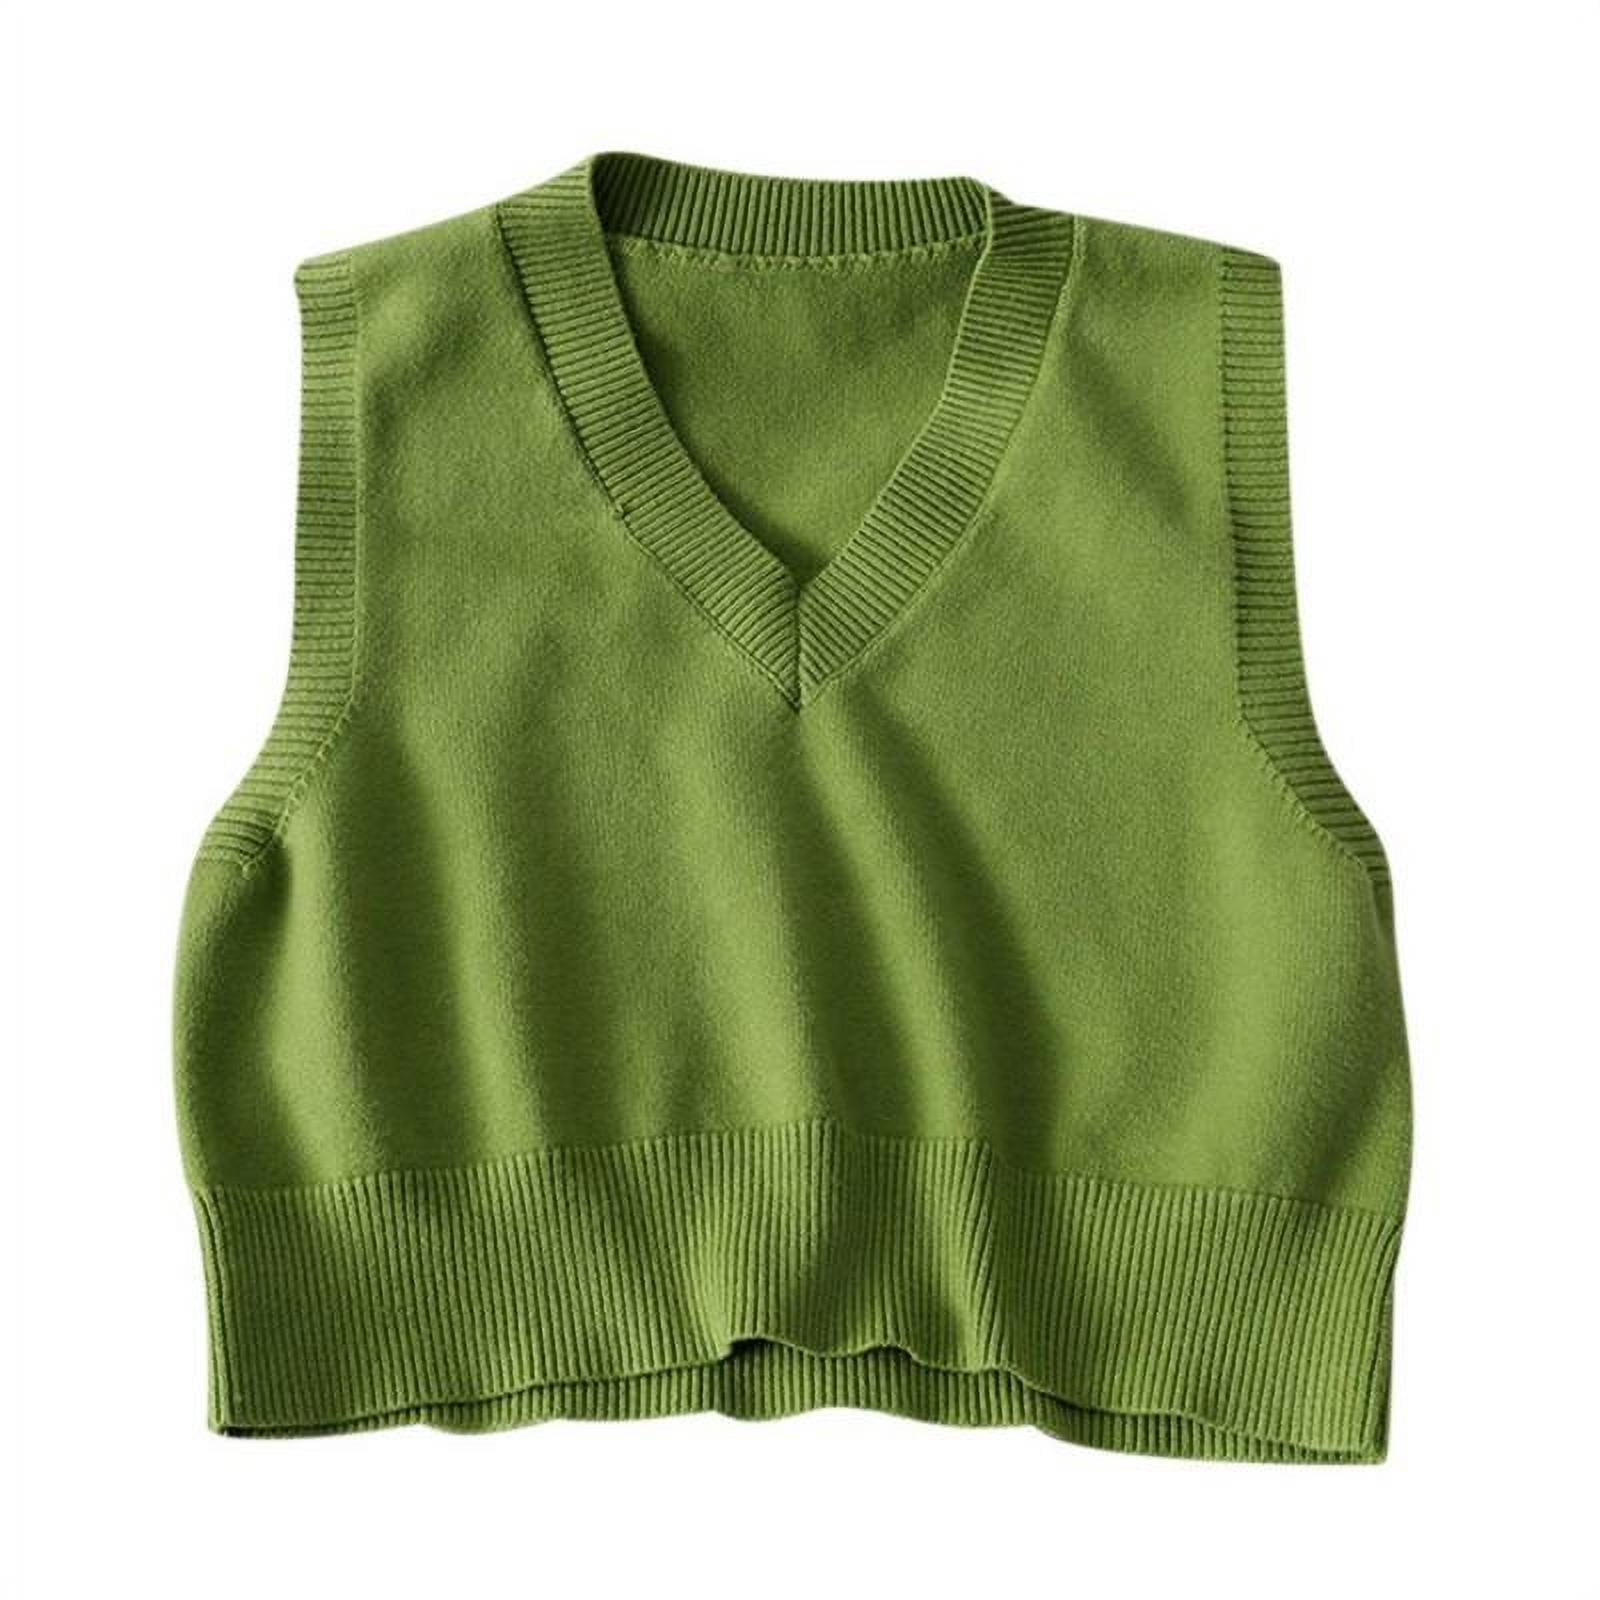 Women's V-Neck Knit Sweater Vest, Solid Color Sleeveless Loose Top, Green